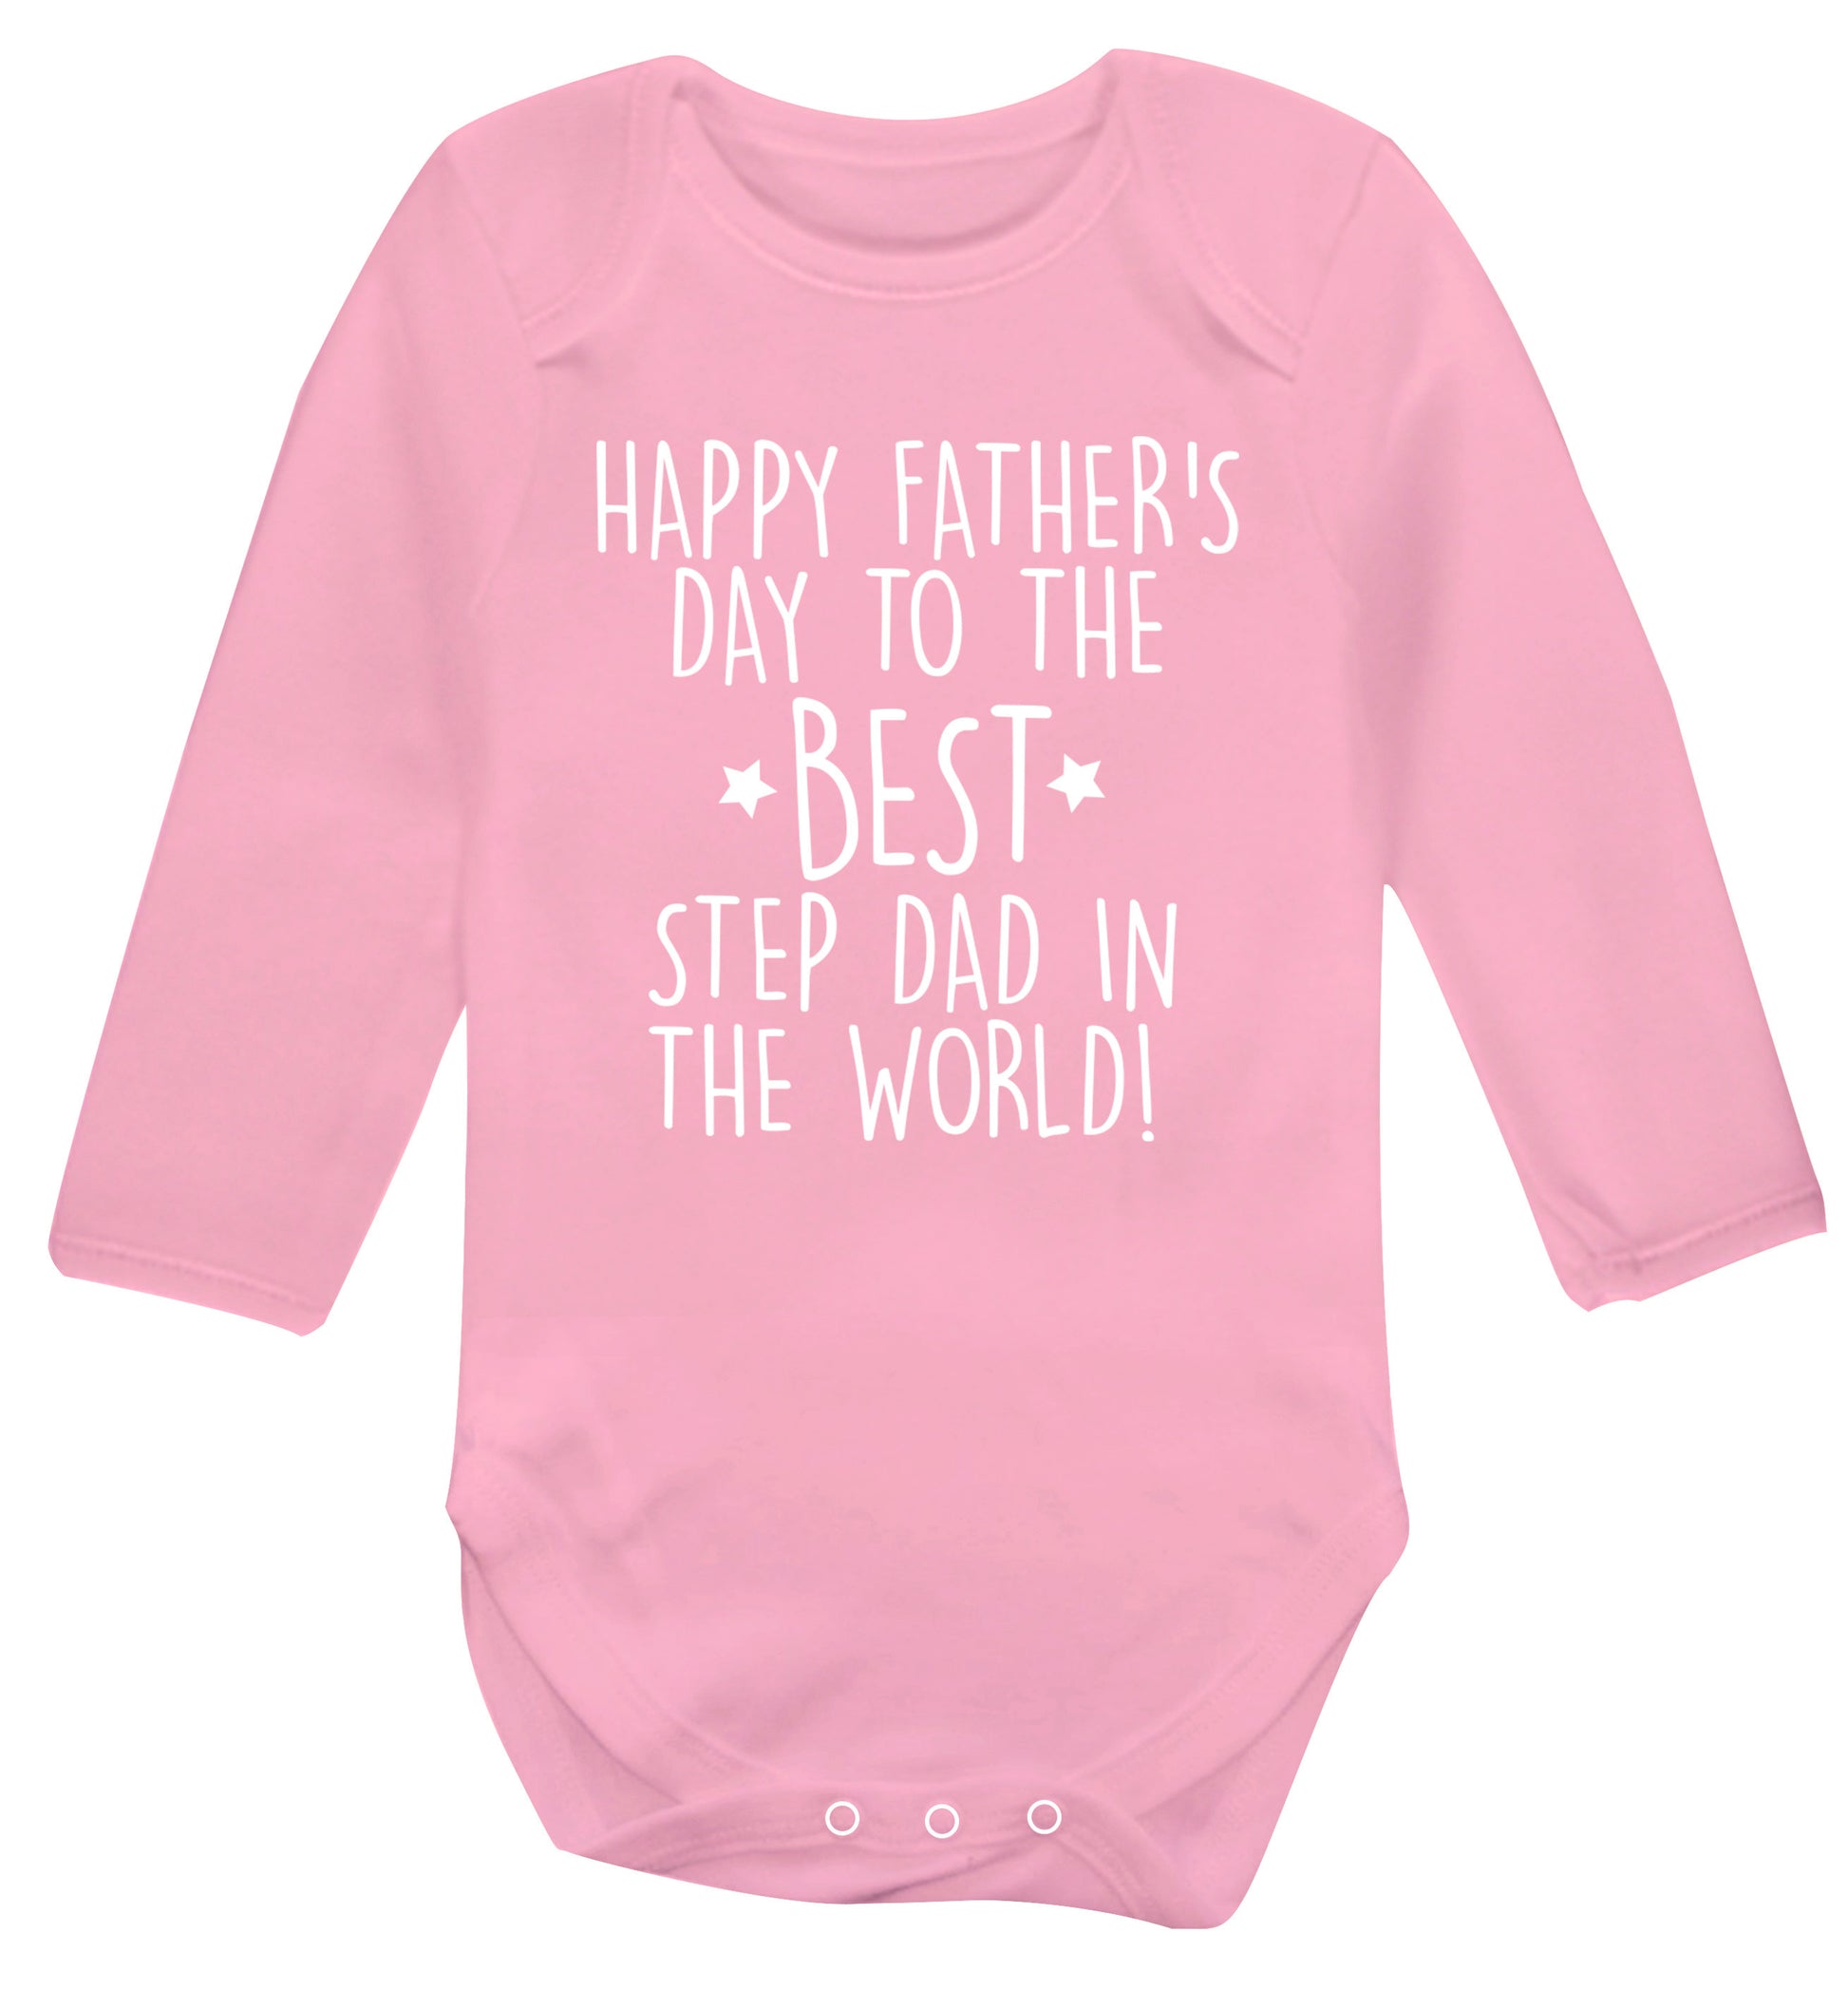 Happy Father's day to the best step dad in the world! Baby Vest long sleeved pale pink 6-12 months